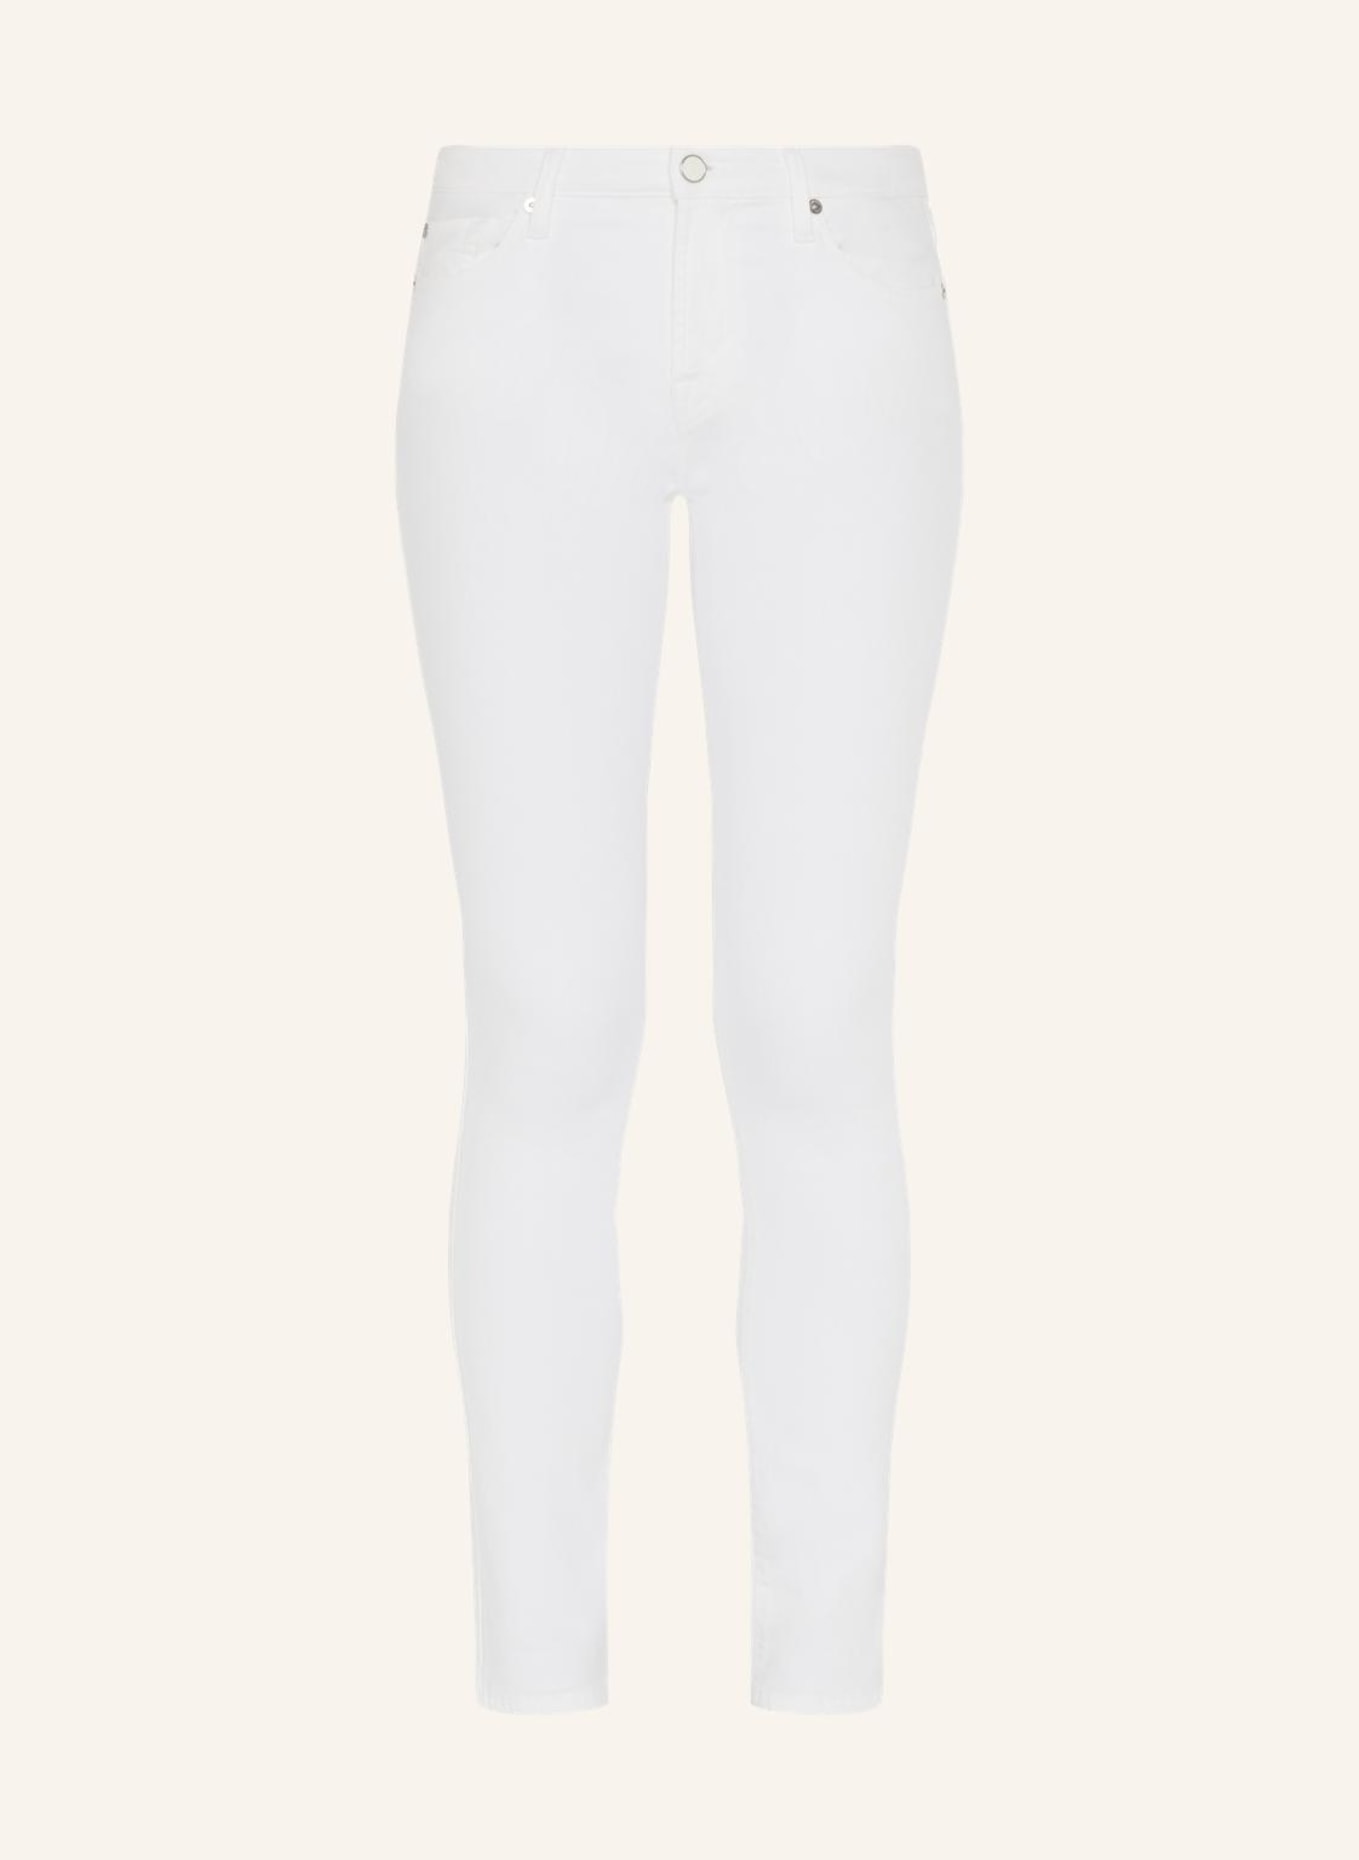 7 for all mankind Jeans PYPER Slim fit, Farbe: WEISS (Bild 1)